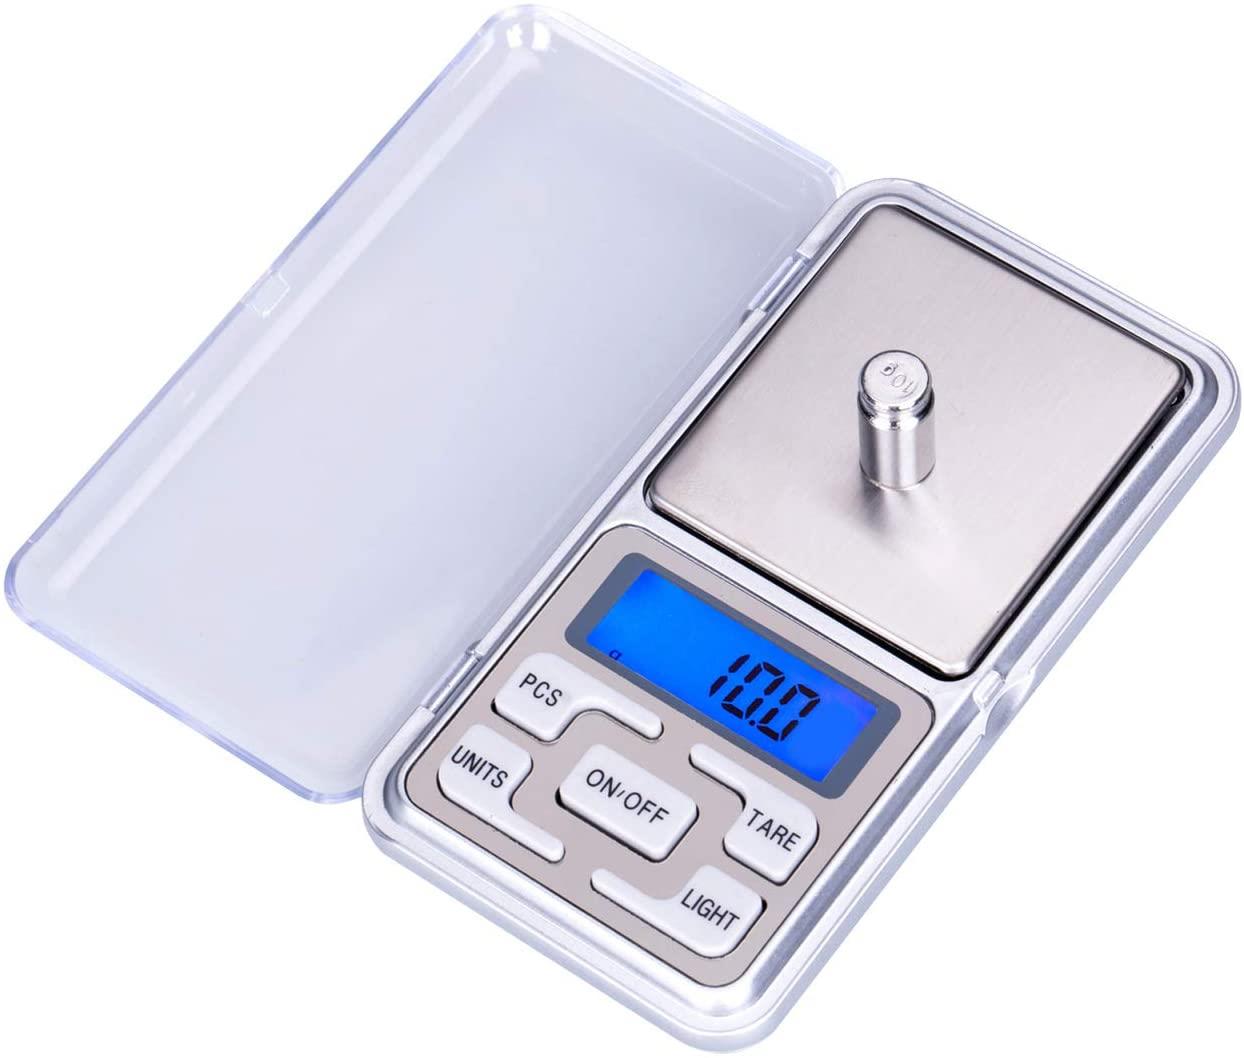 PS-300 Pocket Scales 300g/0.01g